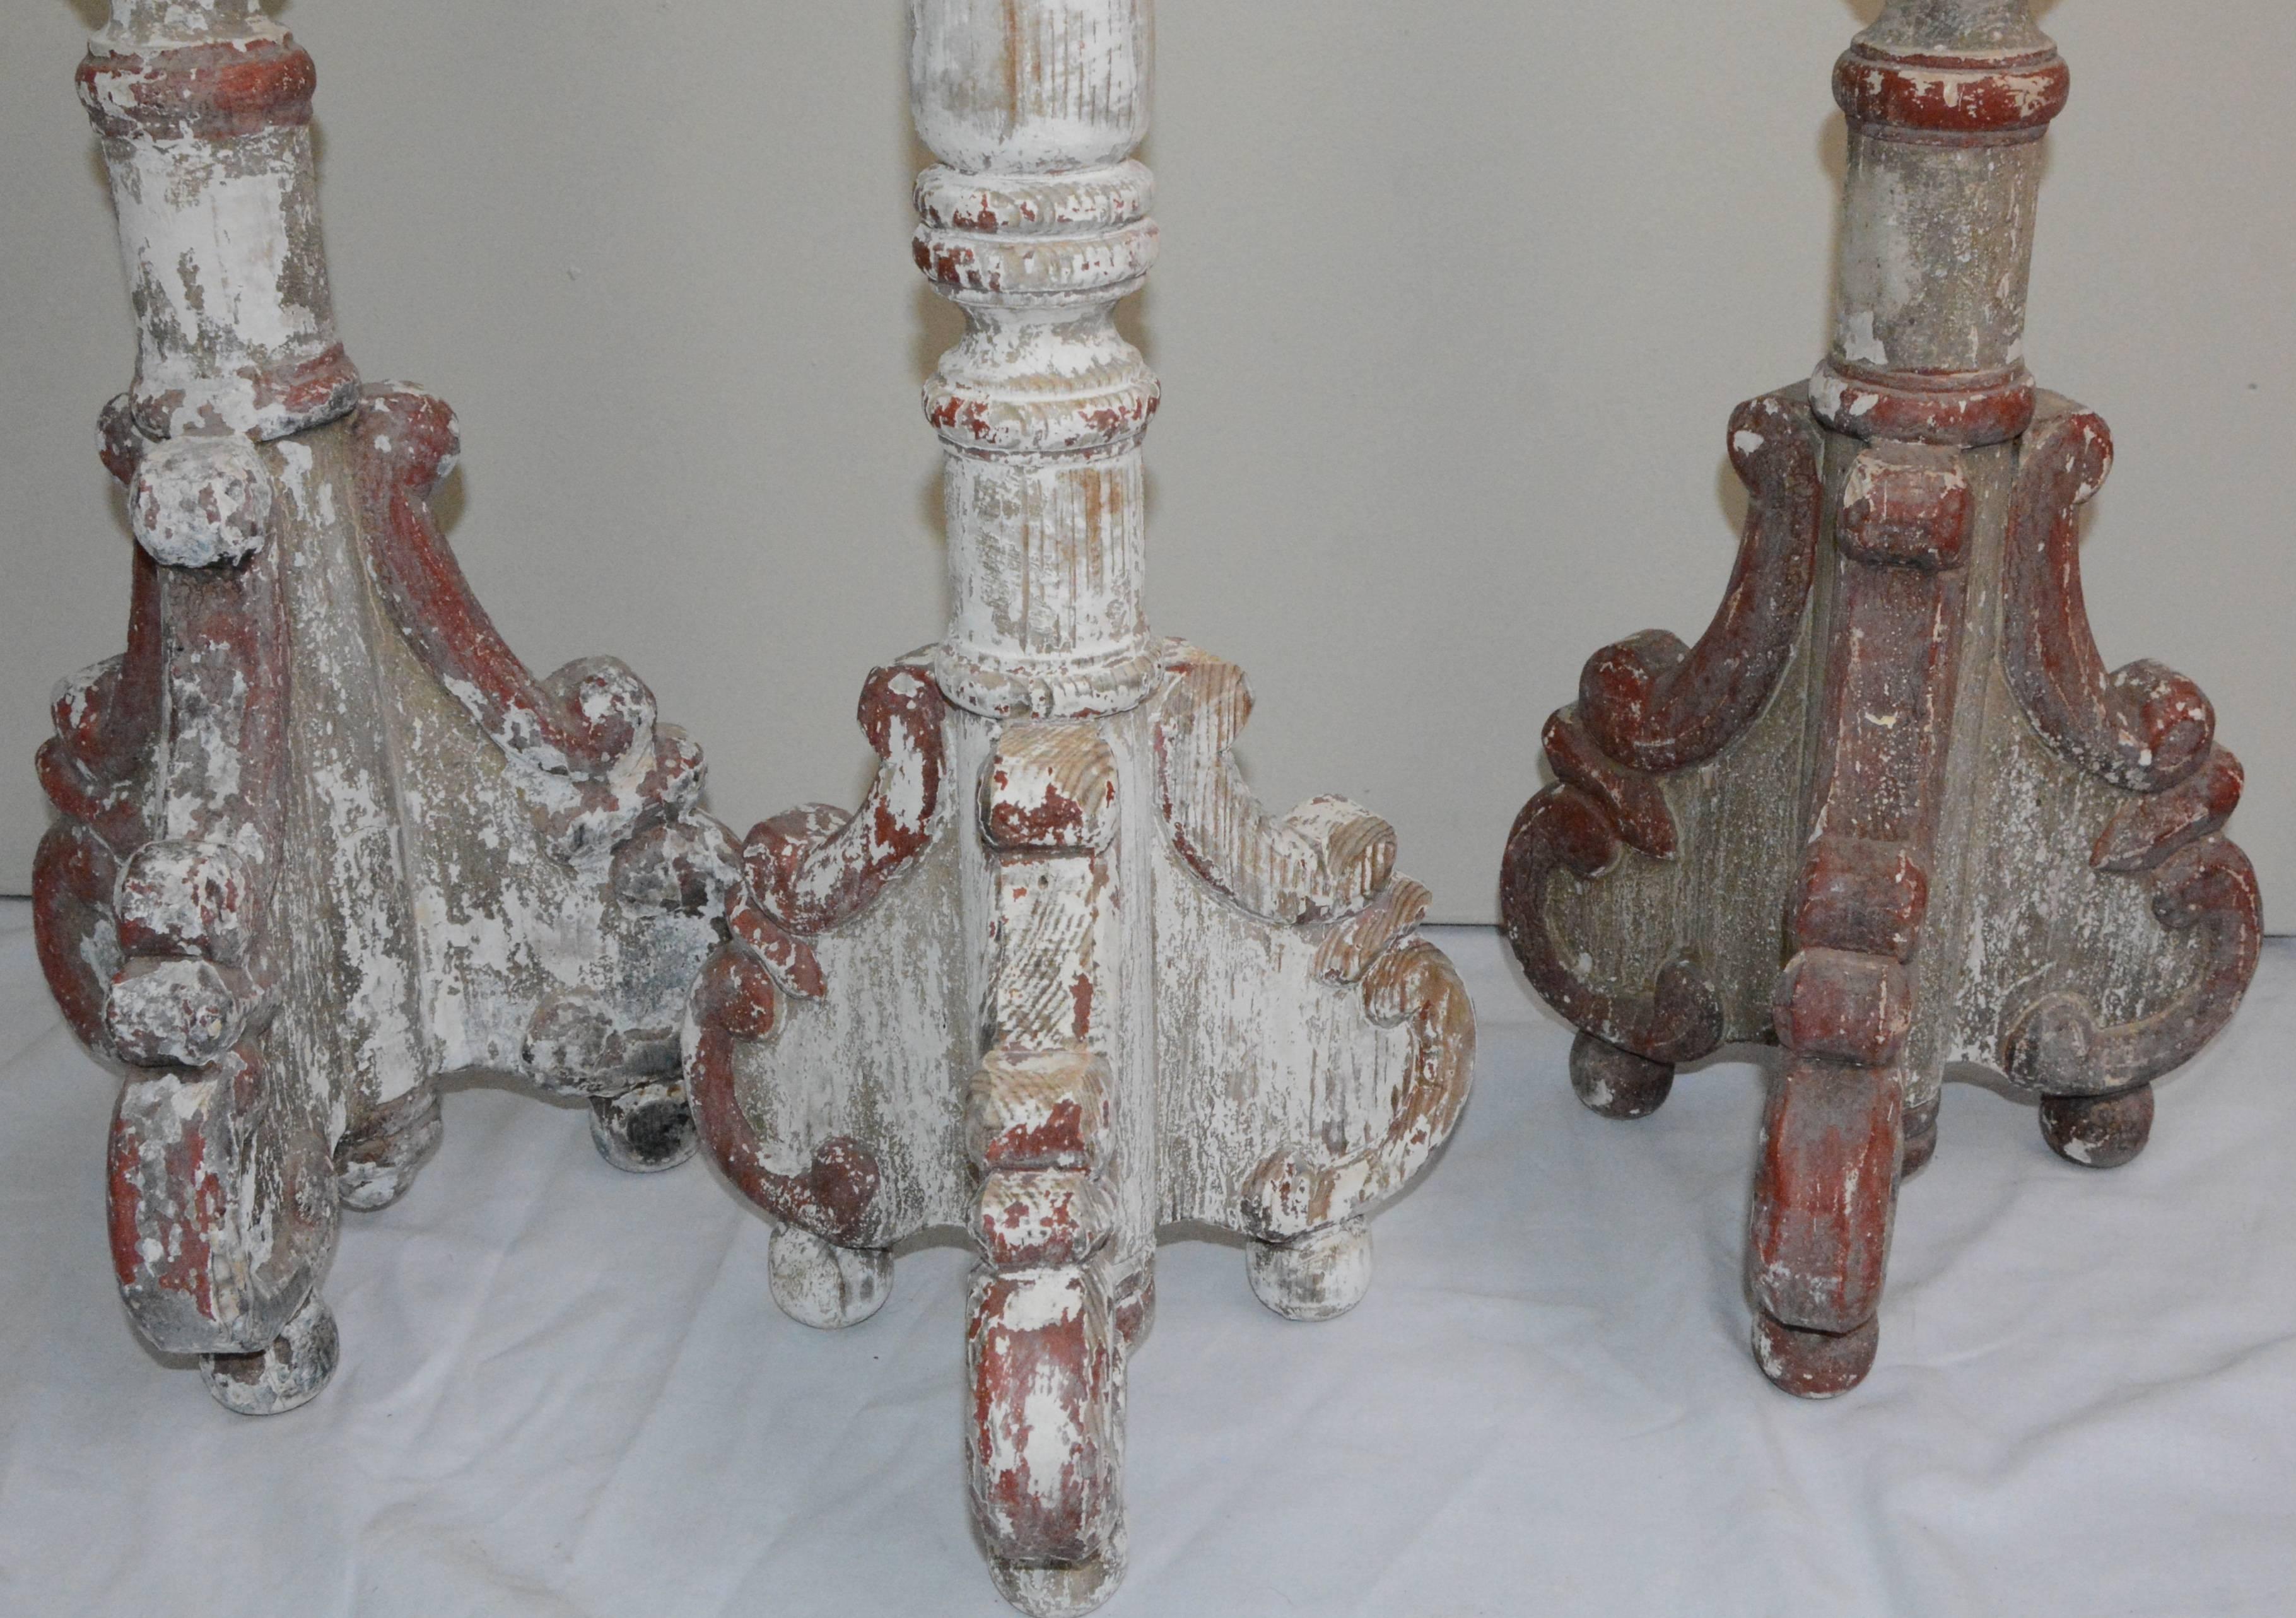 This is a nice group of large floor candlesticks. The three matching wooden items feature ornate splayed legs which are supported by ball feet. Each turned column is topped by a metal sconce, with two of the sconces having an upward rising petal